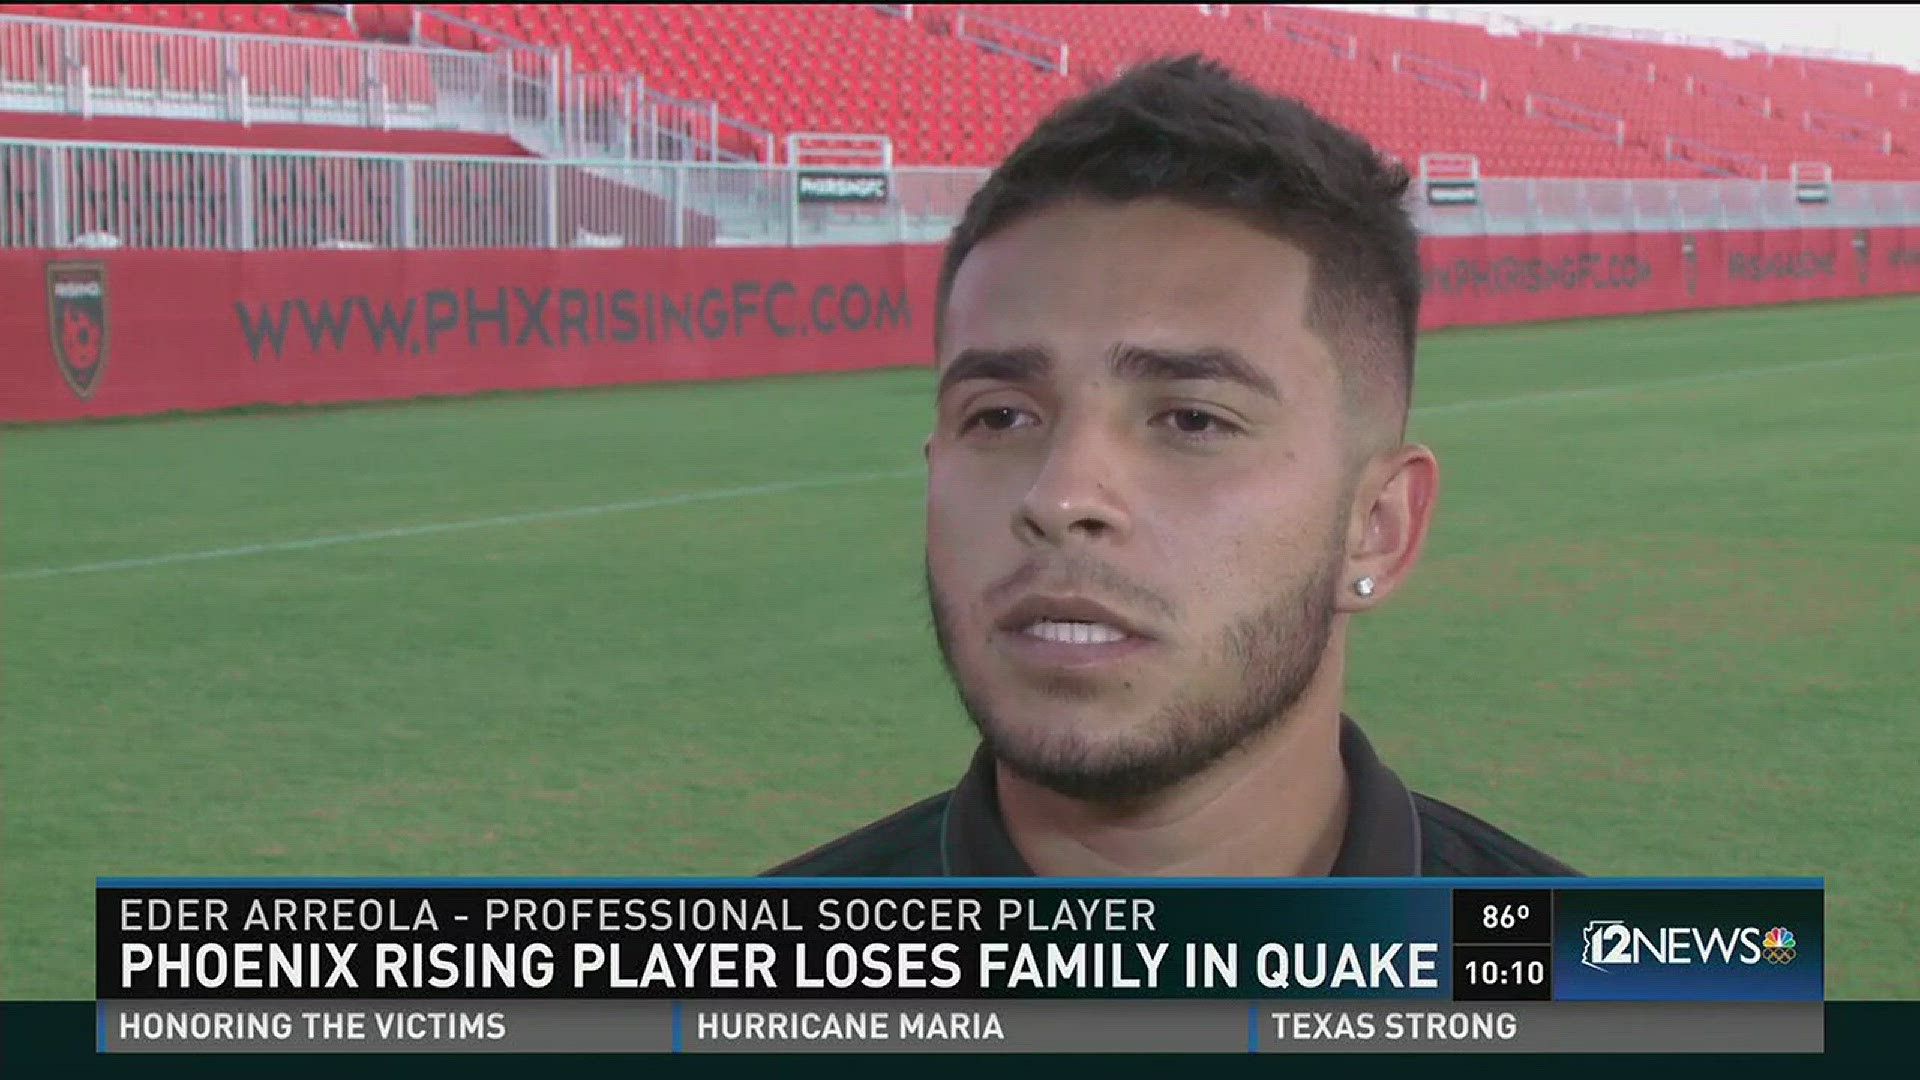 Professional soccer player Elder Arreola lost family members to the earthquake in Mexico earlier this week.